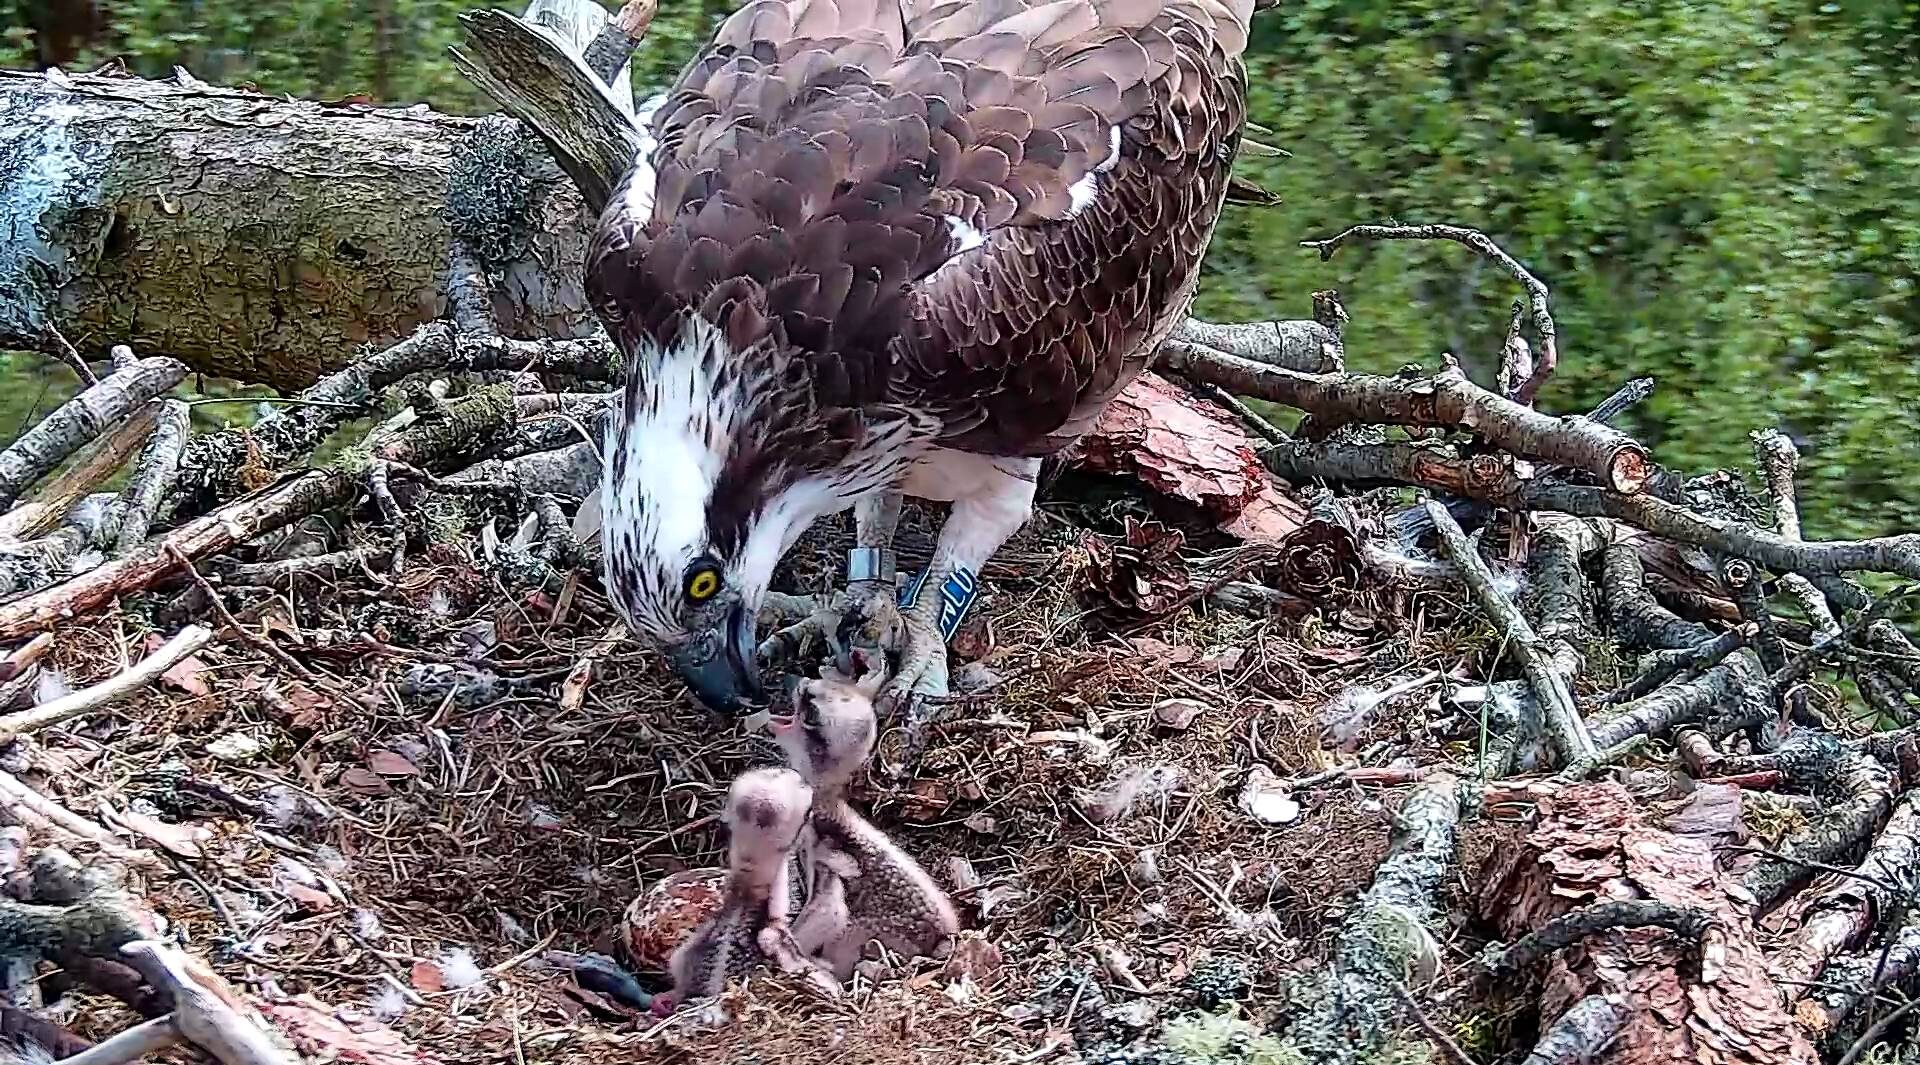 A female osprey feeds fish to her two chicks.